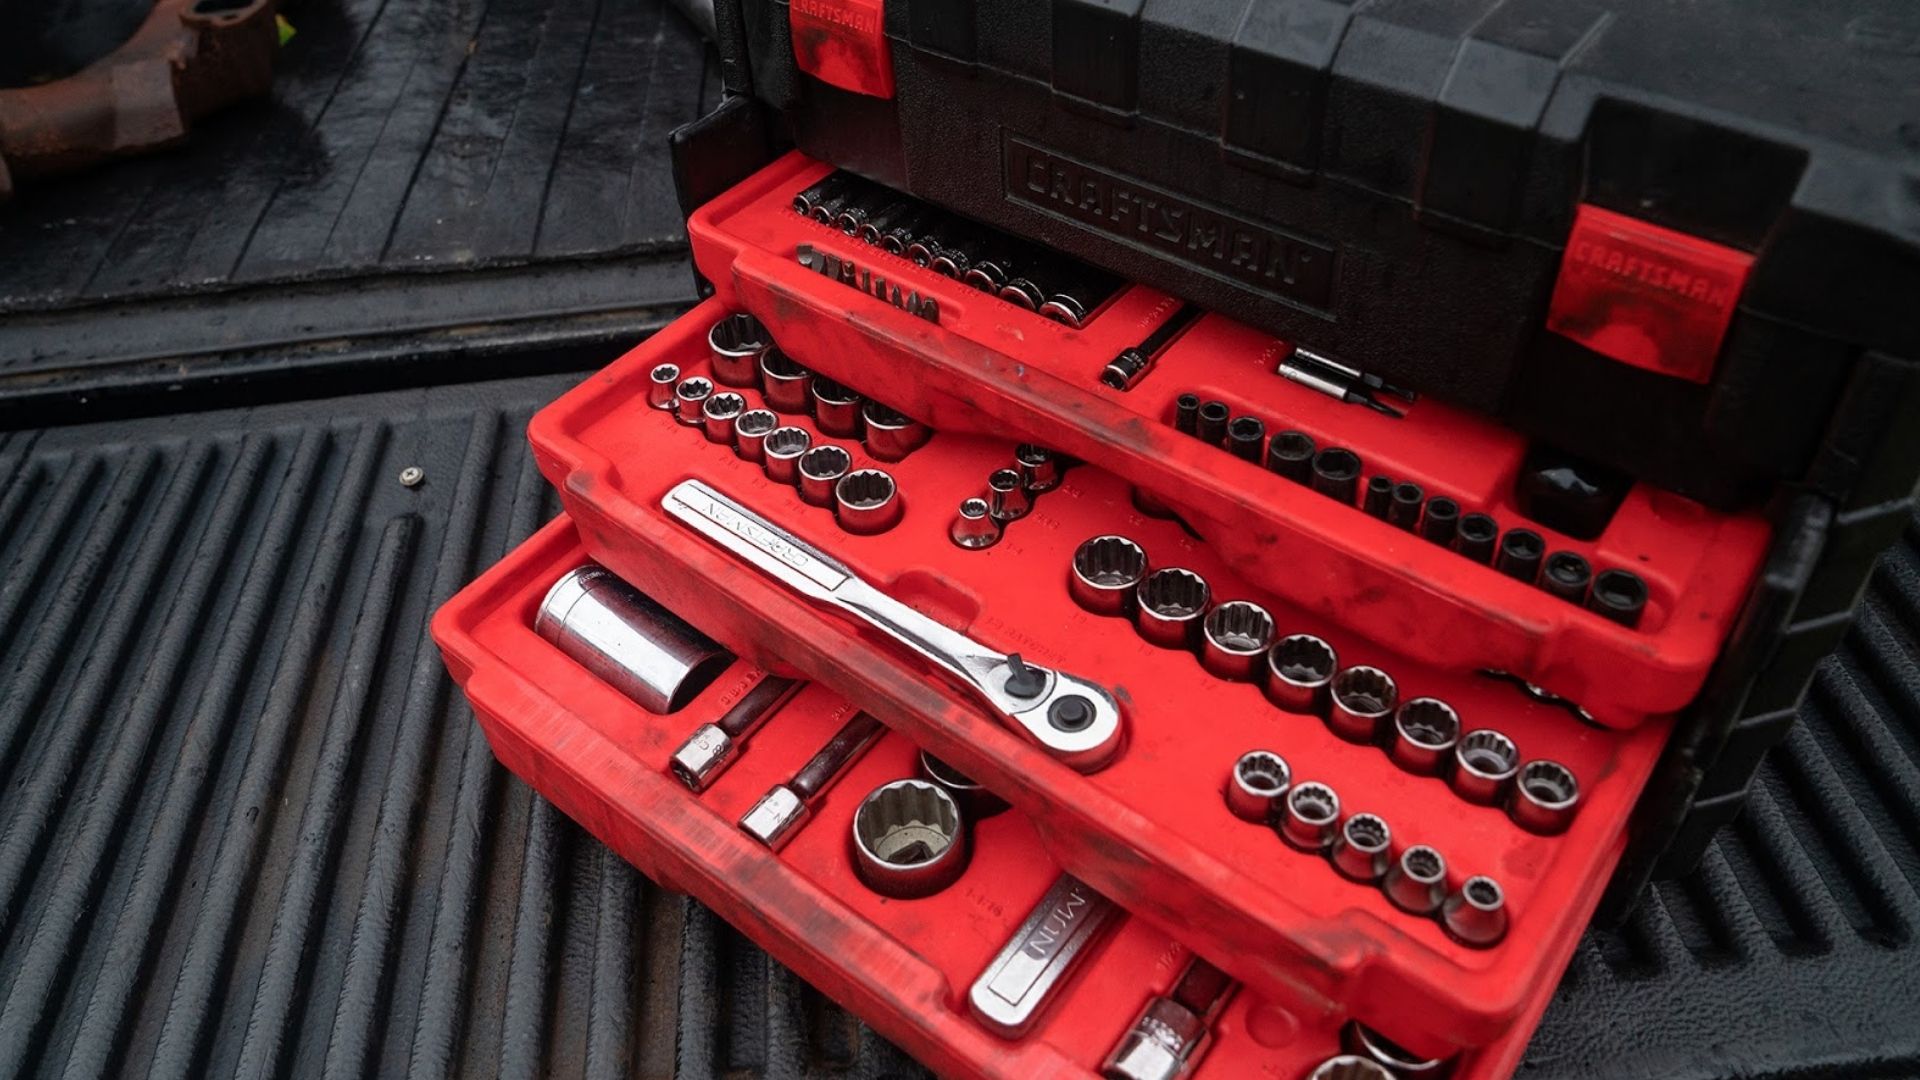 Craftsman Mechanic's Tool Set review: hands-on with the ultimate